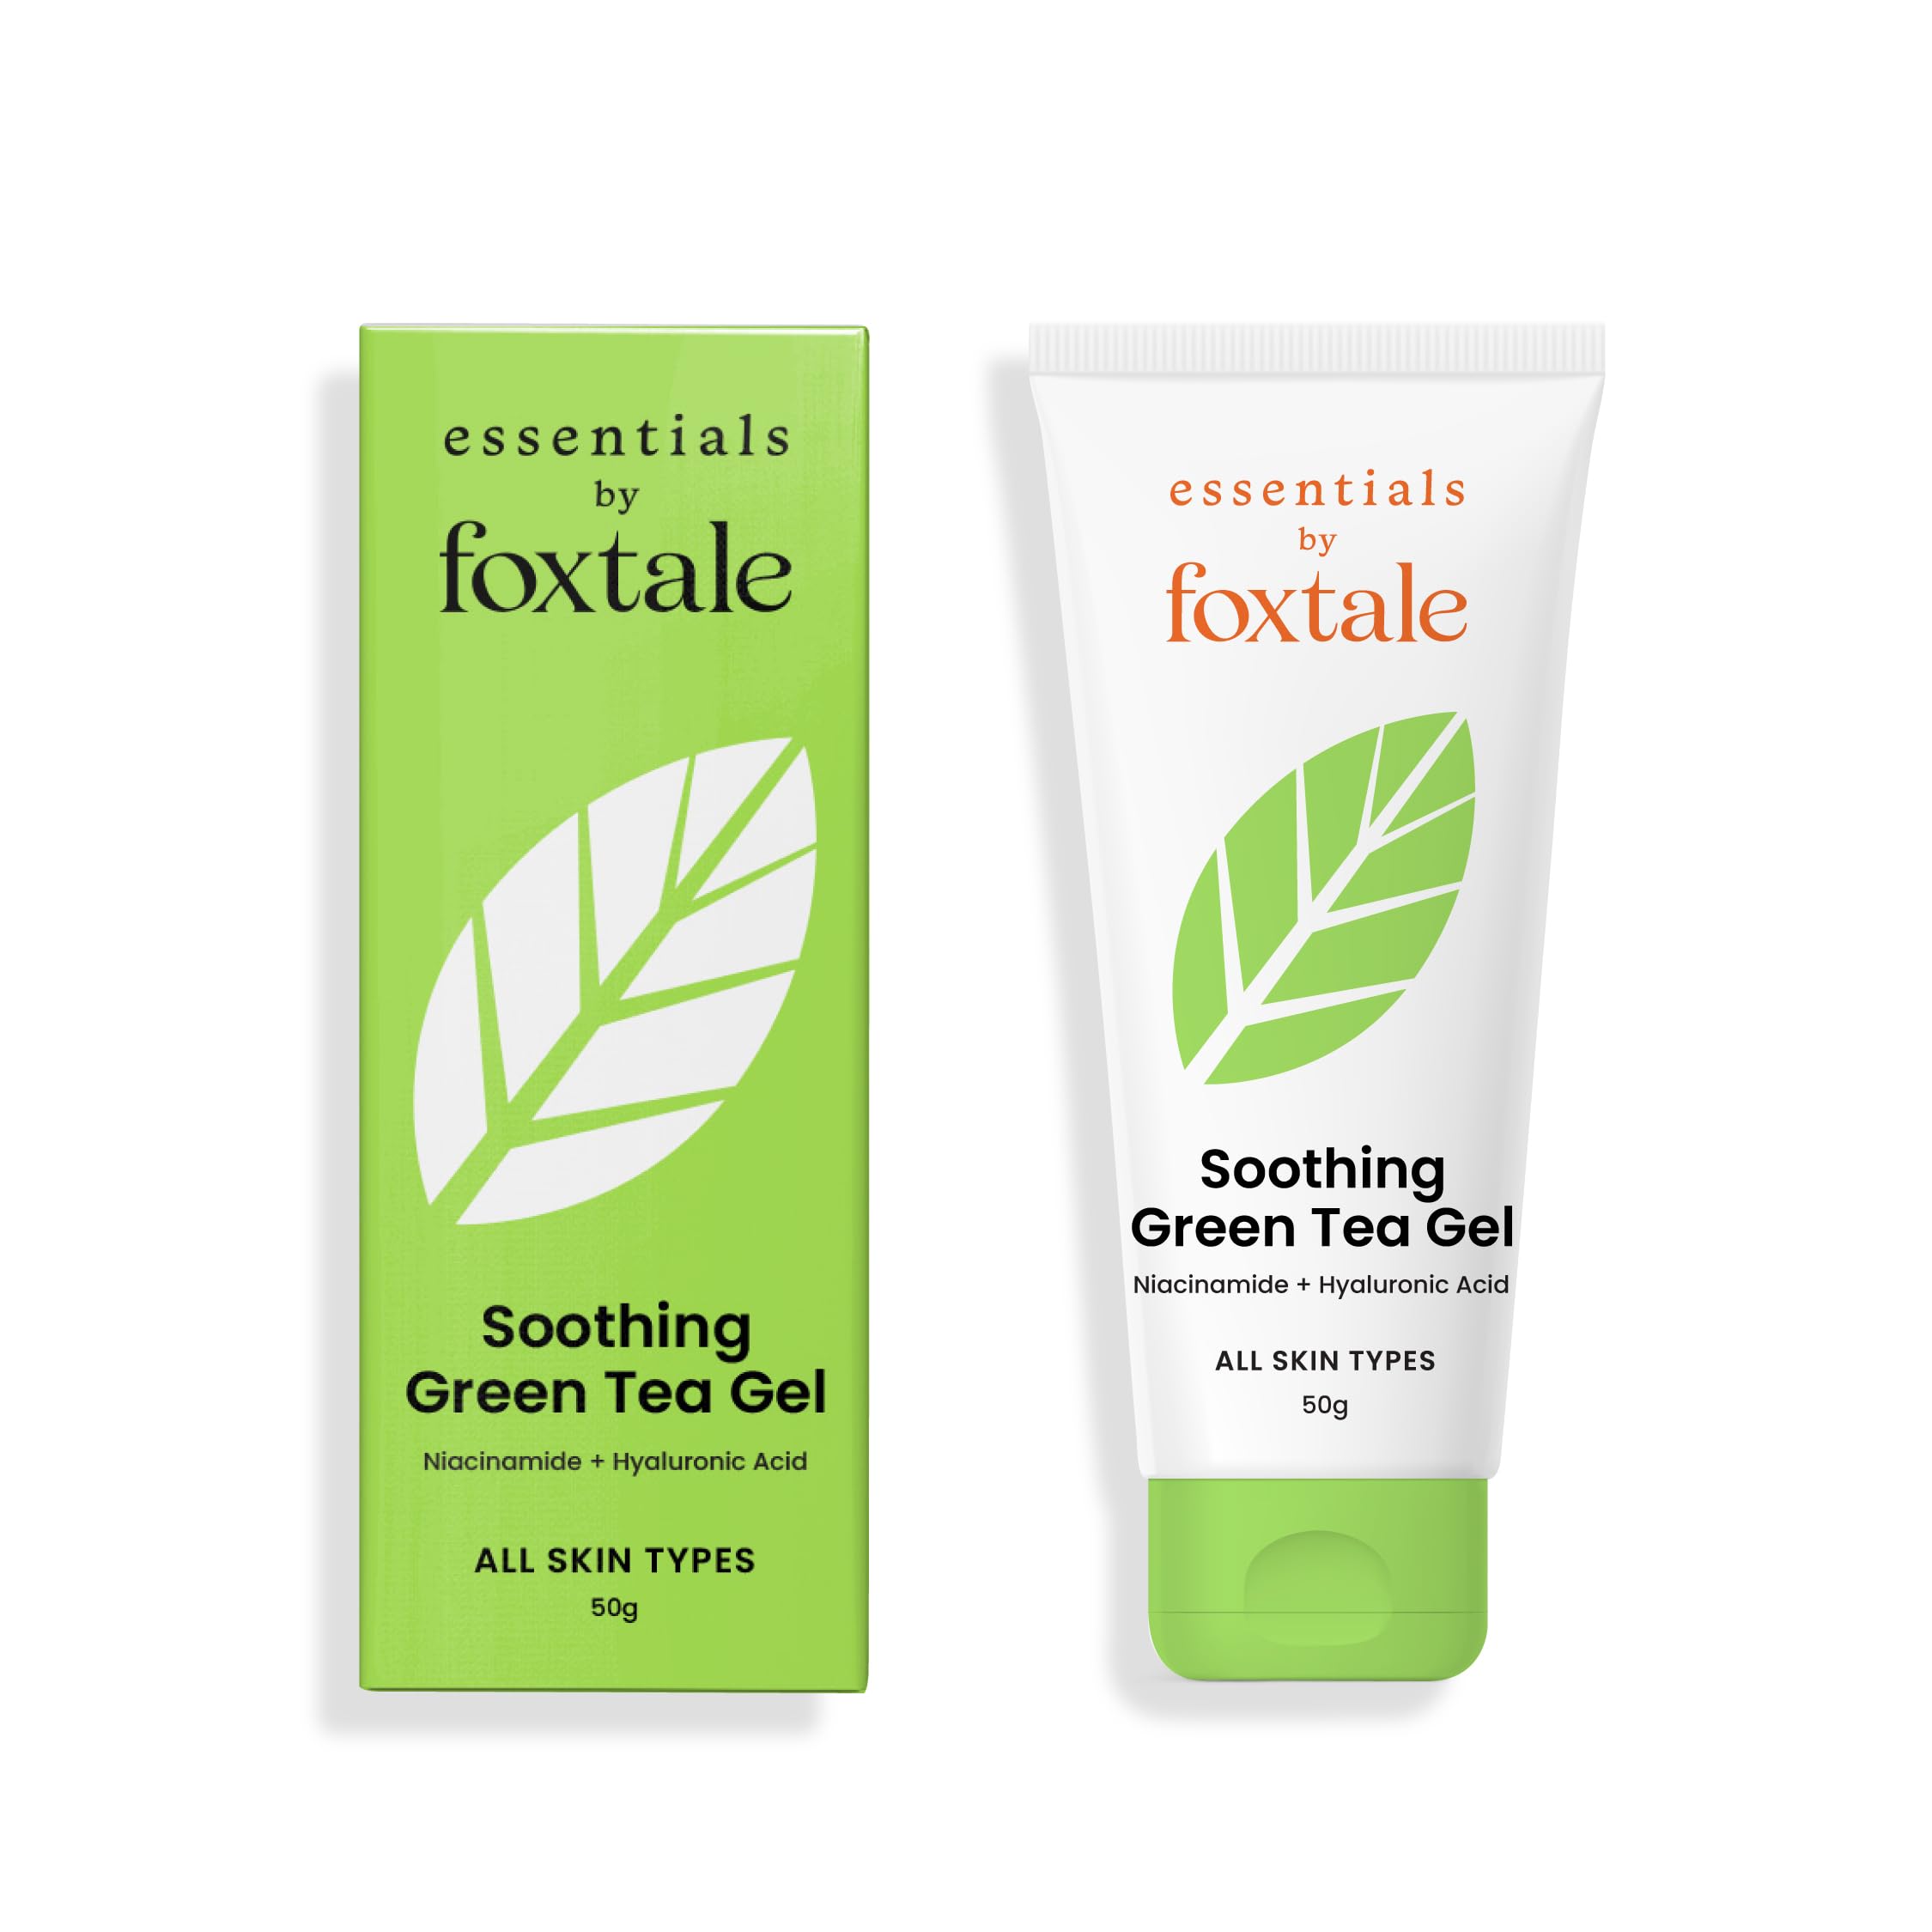 Foxtale Essentials Soothing Green Tea Oil-Free Face Moisturizer